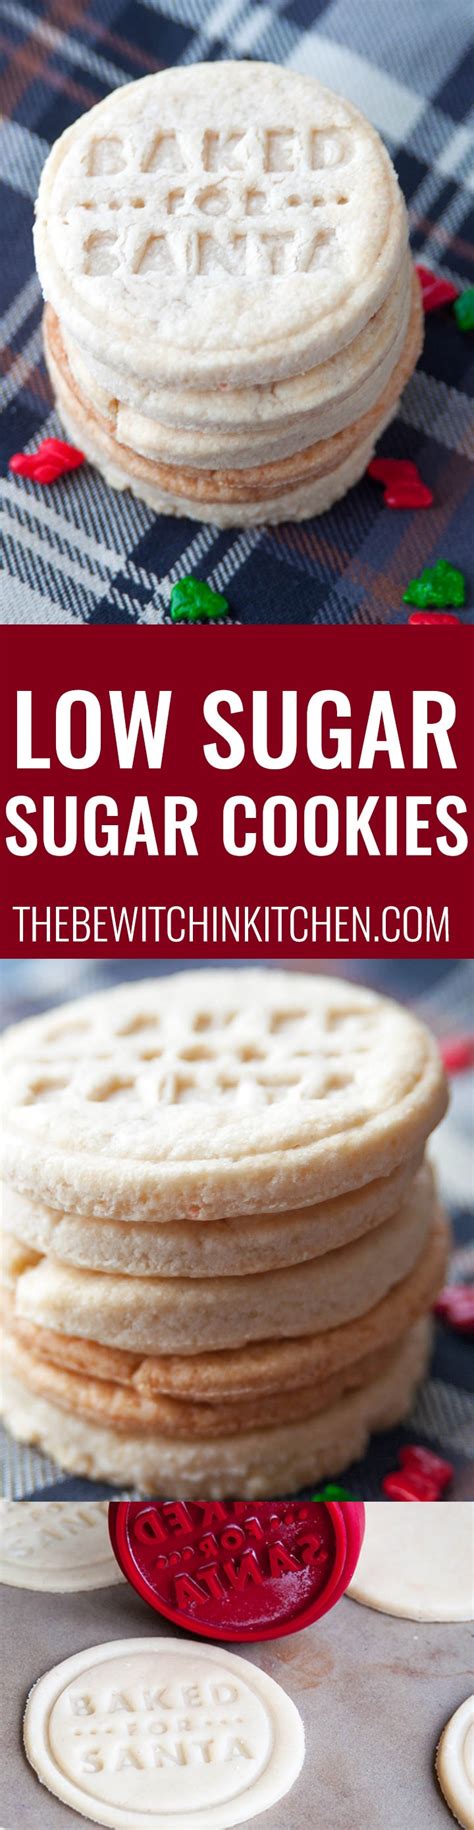 Sugar cookie dough, water, eggs yolks, food. Low Sugar Cookies Recipe | The Bewitchin' Kitchen